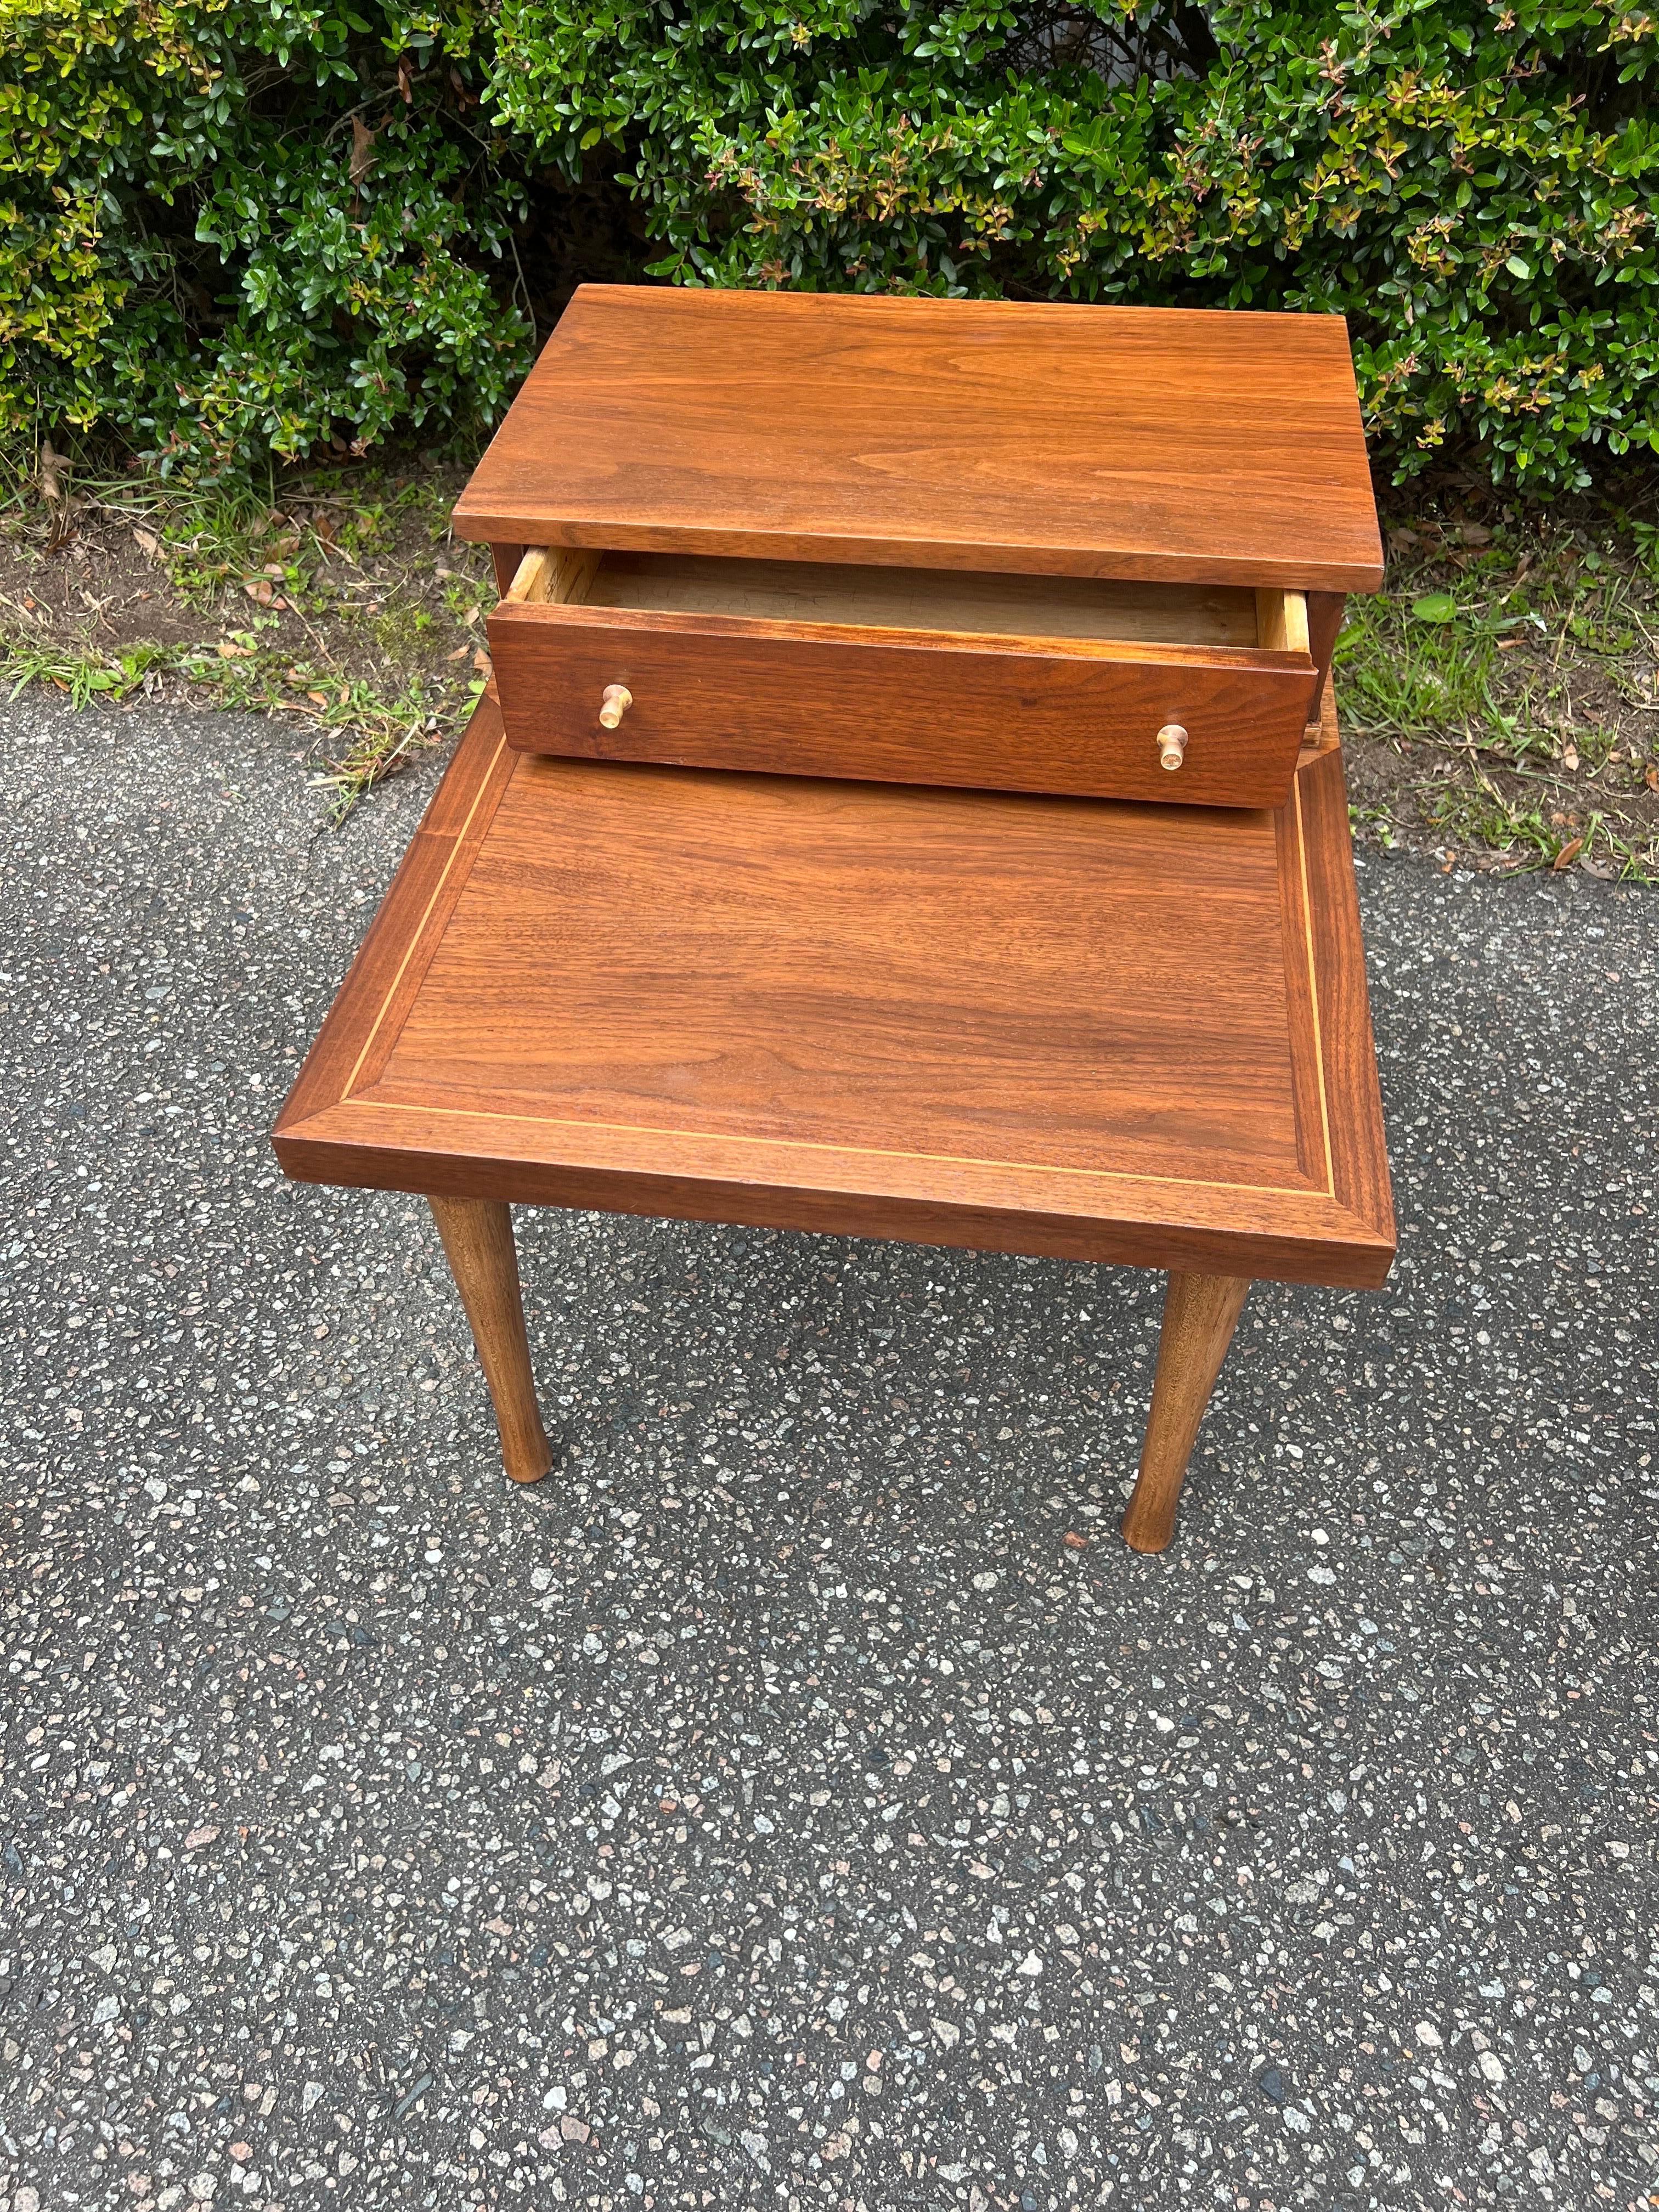 Pair of Mid-20th Century Modern American of Martinsville Side Tables For Sale 1